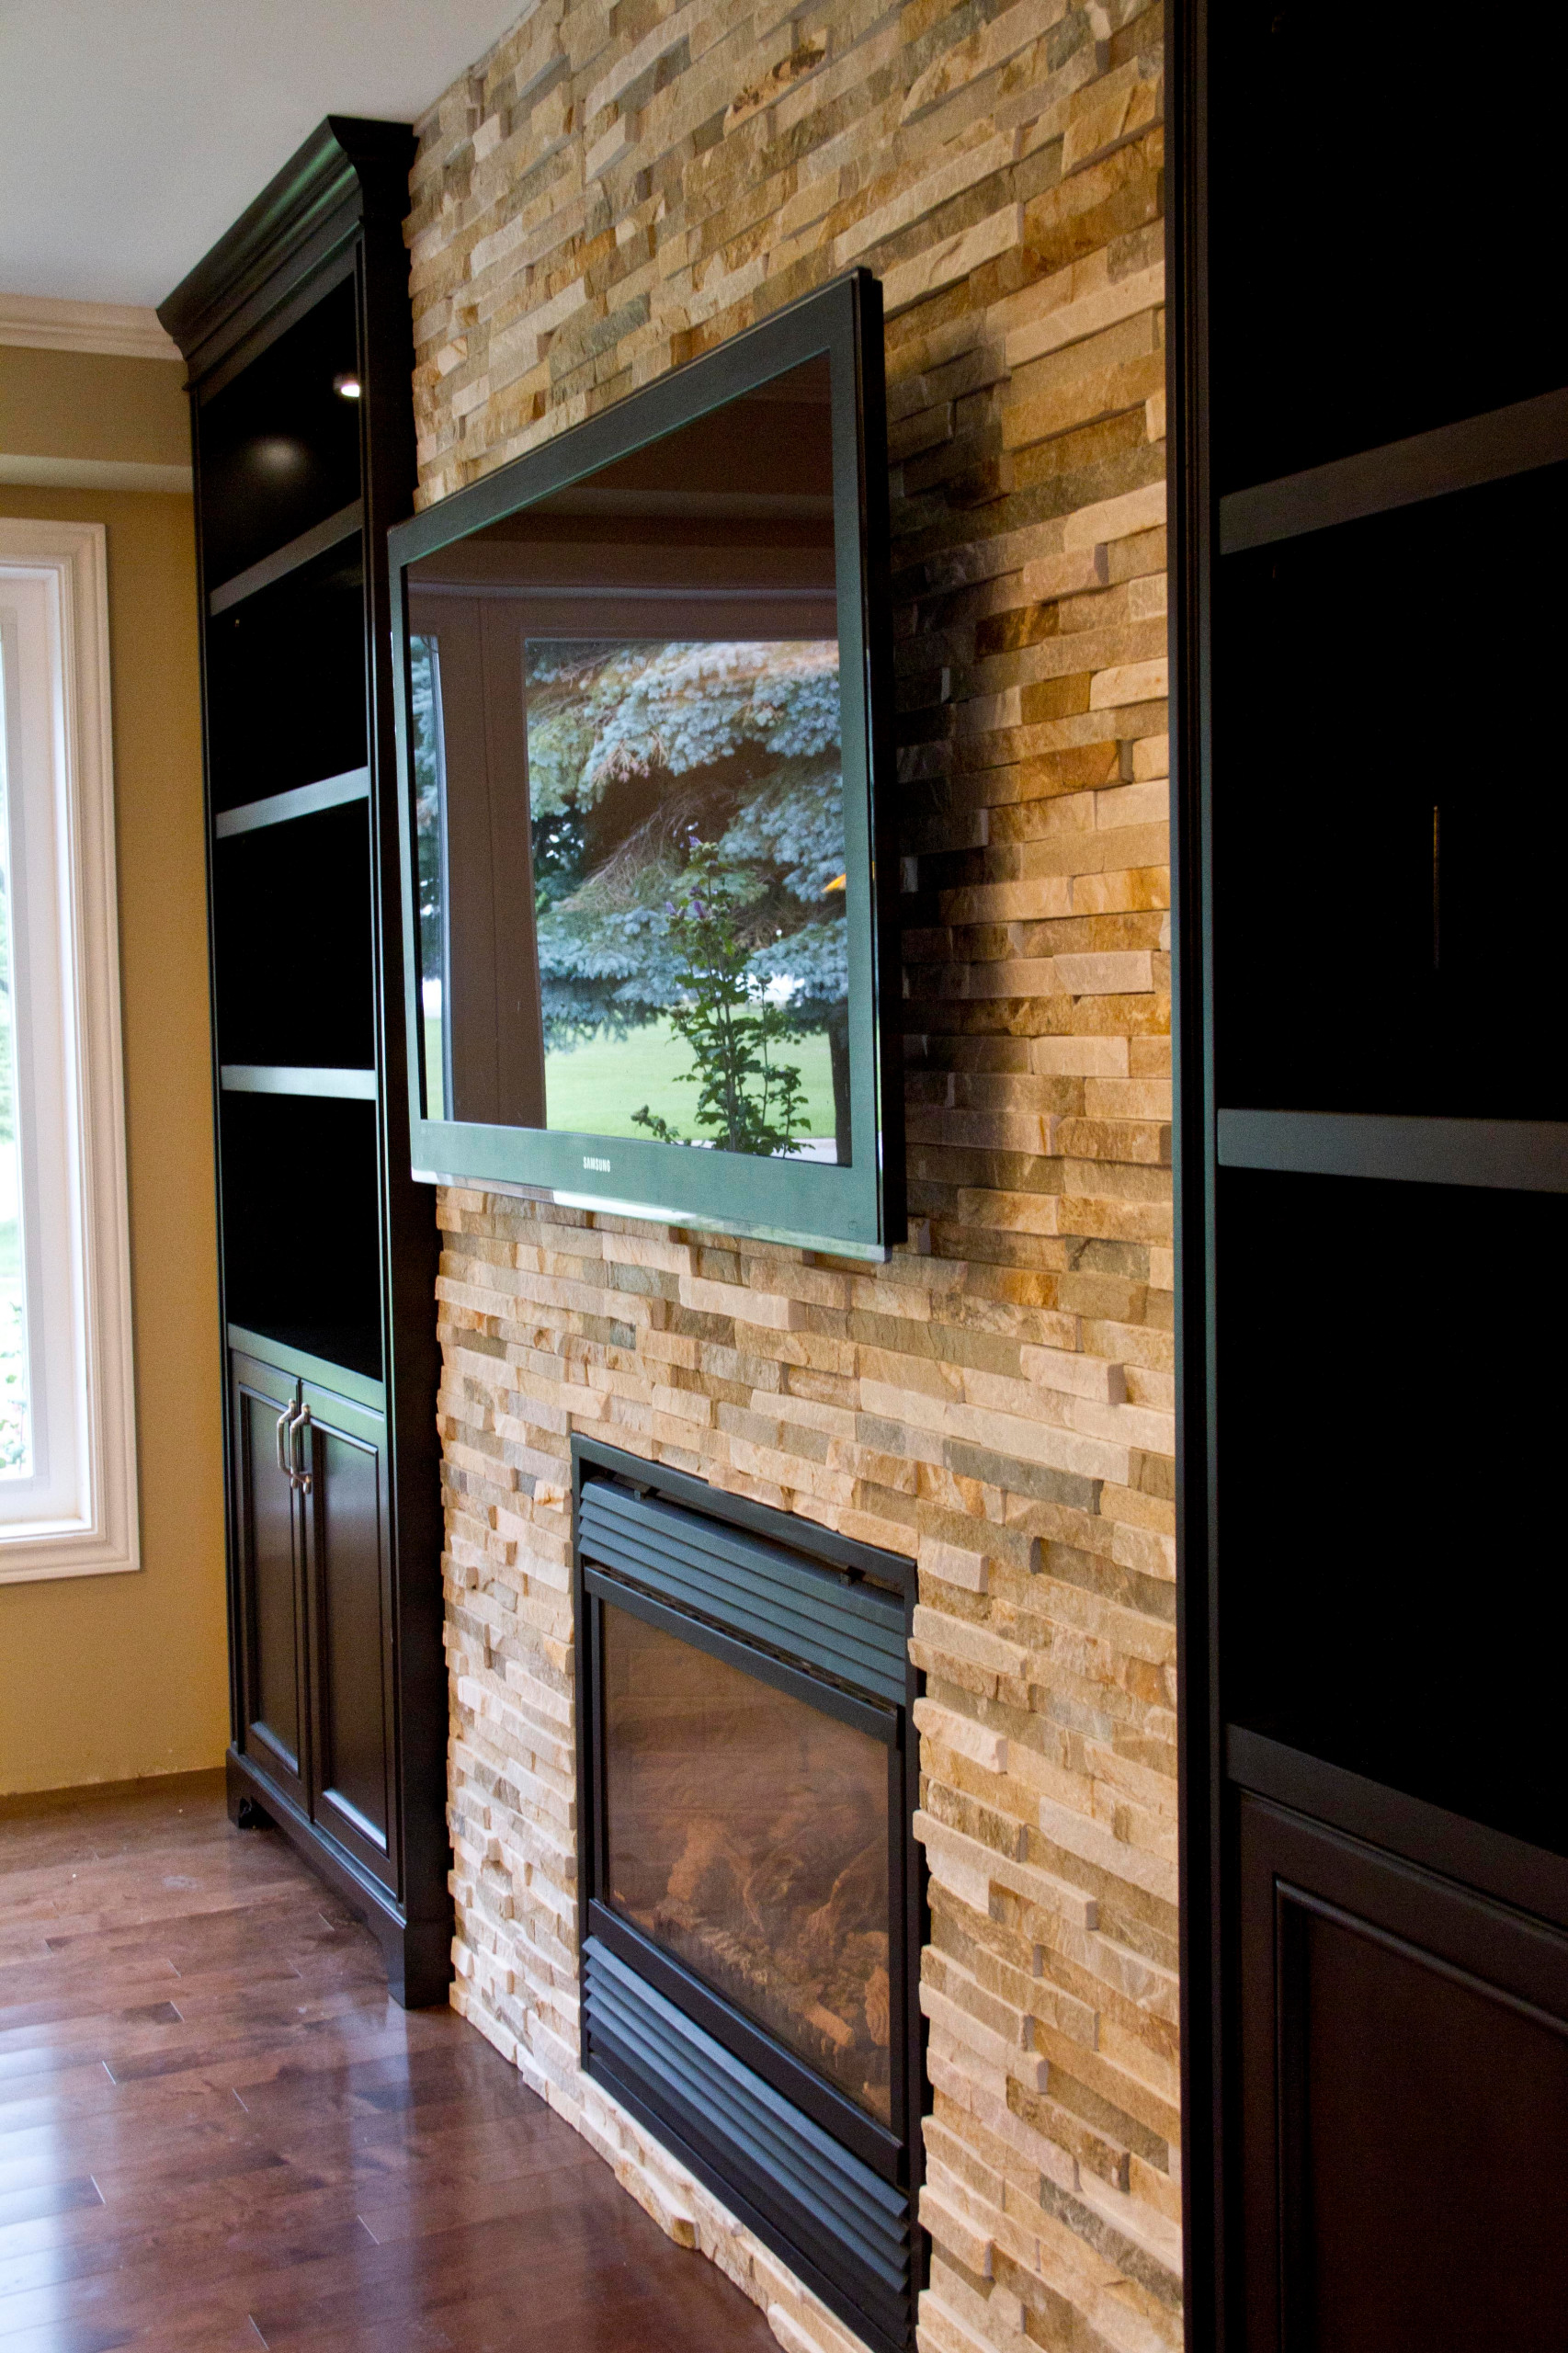 Glass Shelves Built-in Units Around Fireplace